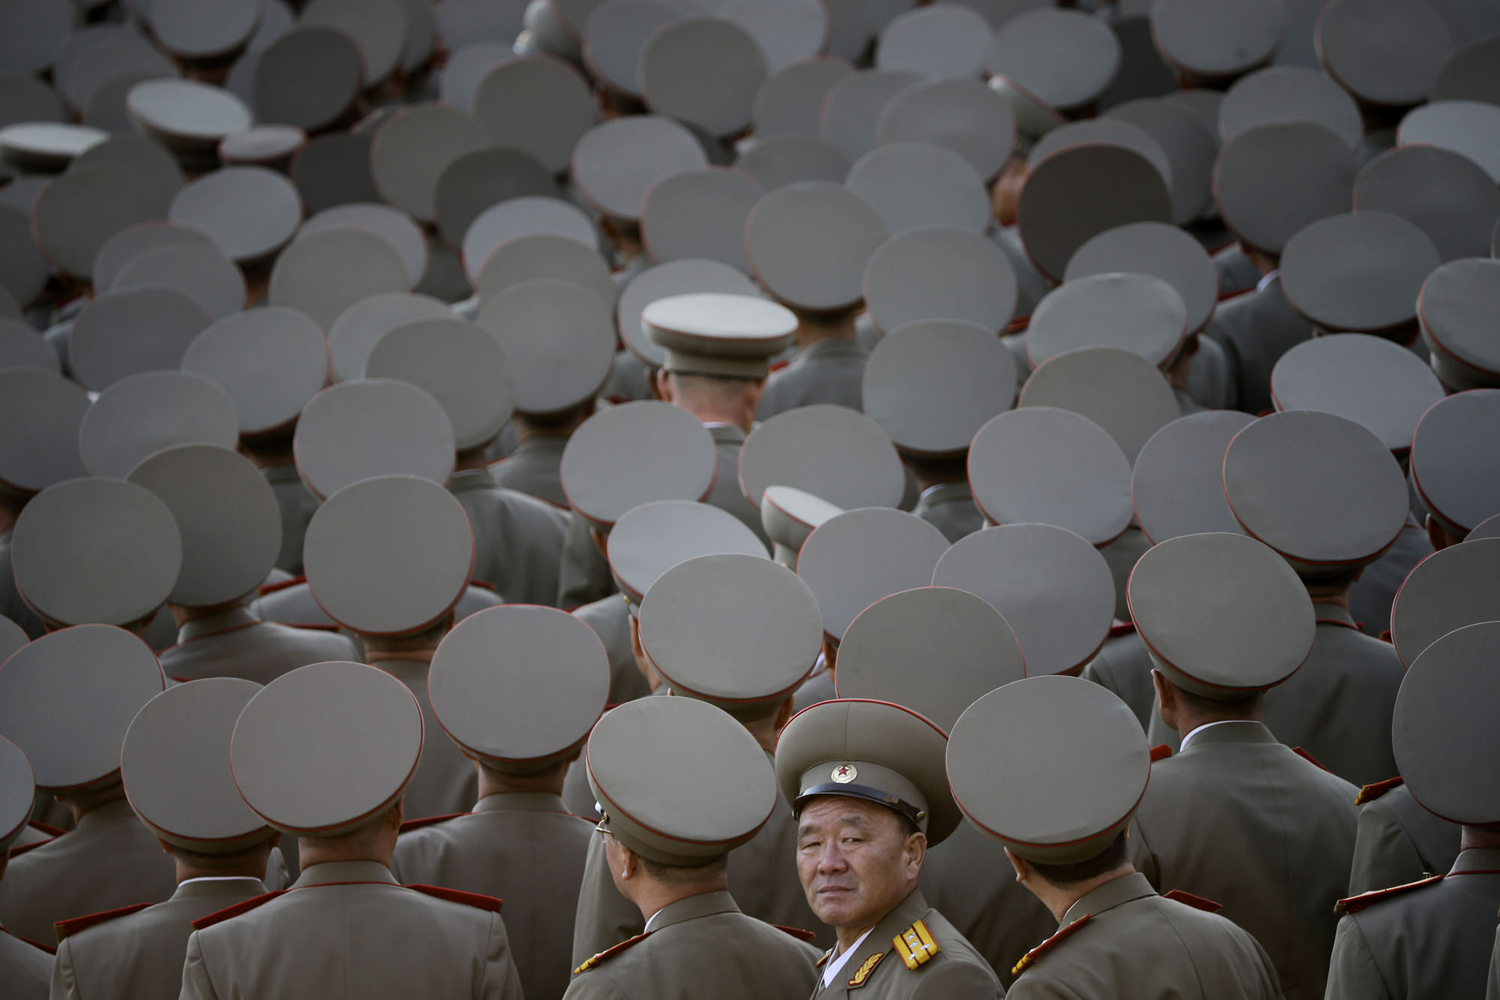 North Korea Marks 70 Years of Workers’ Party Rule 15